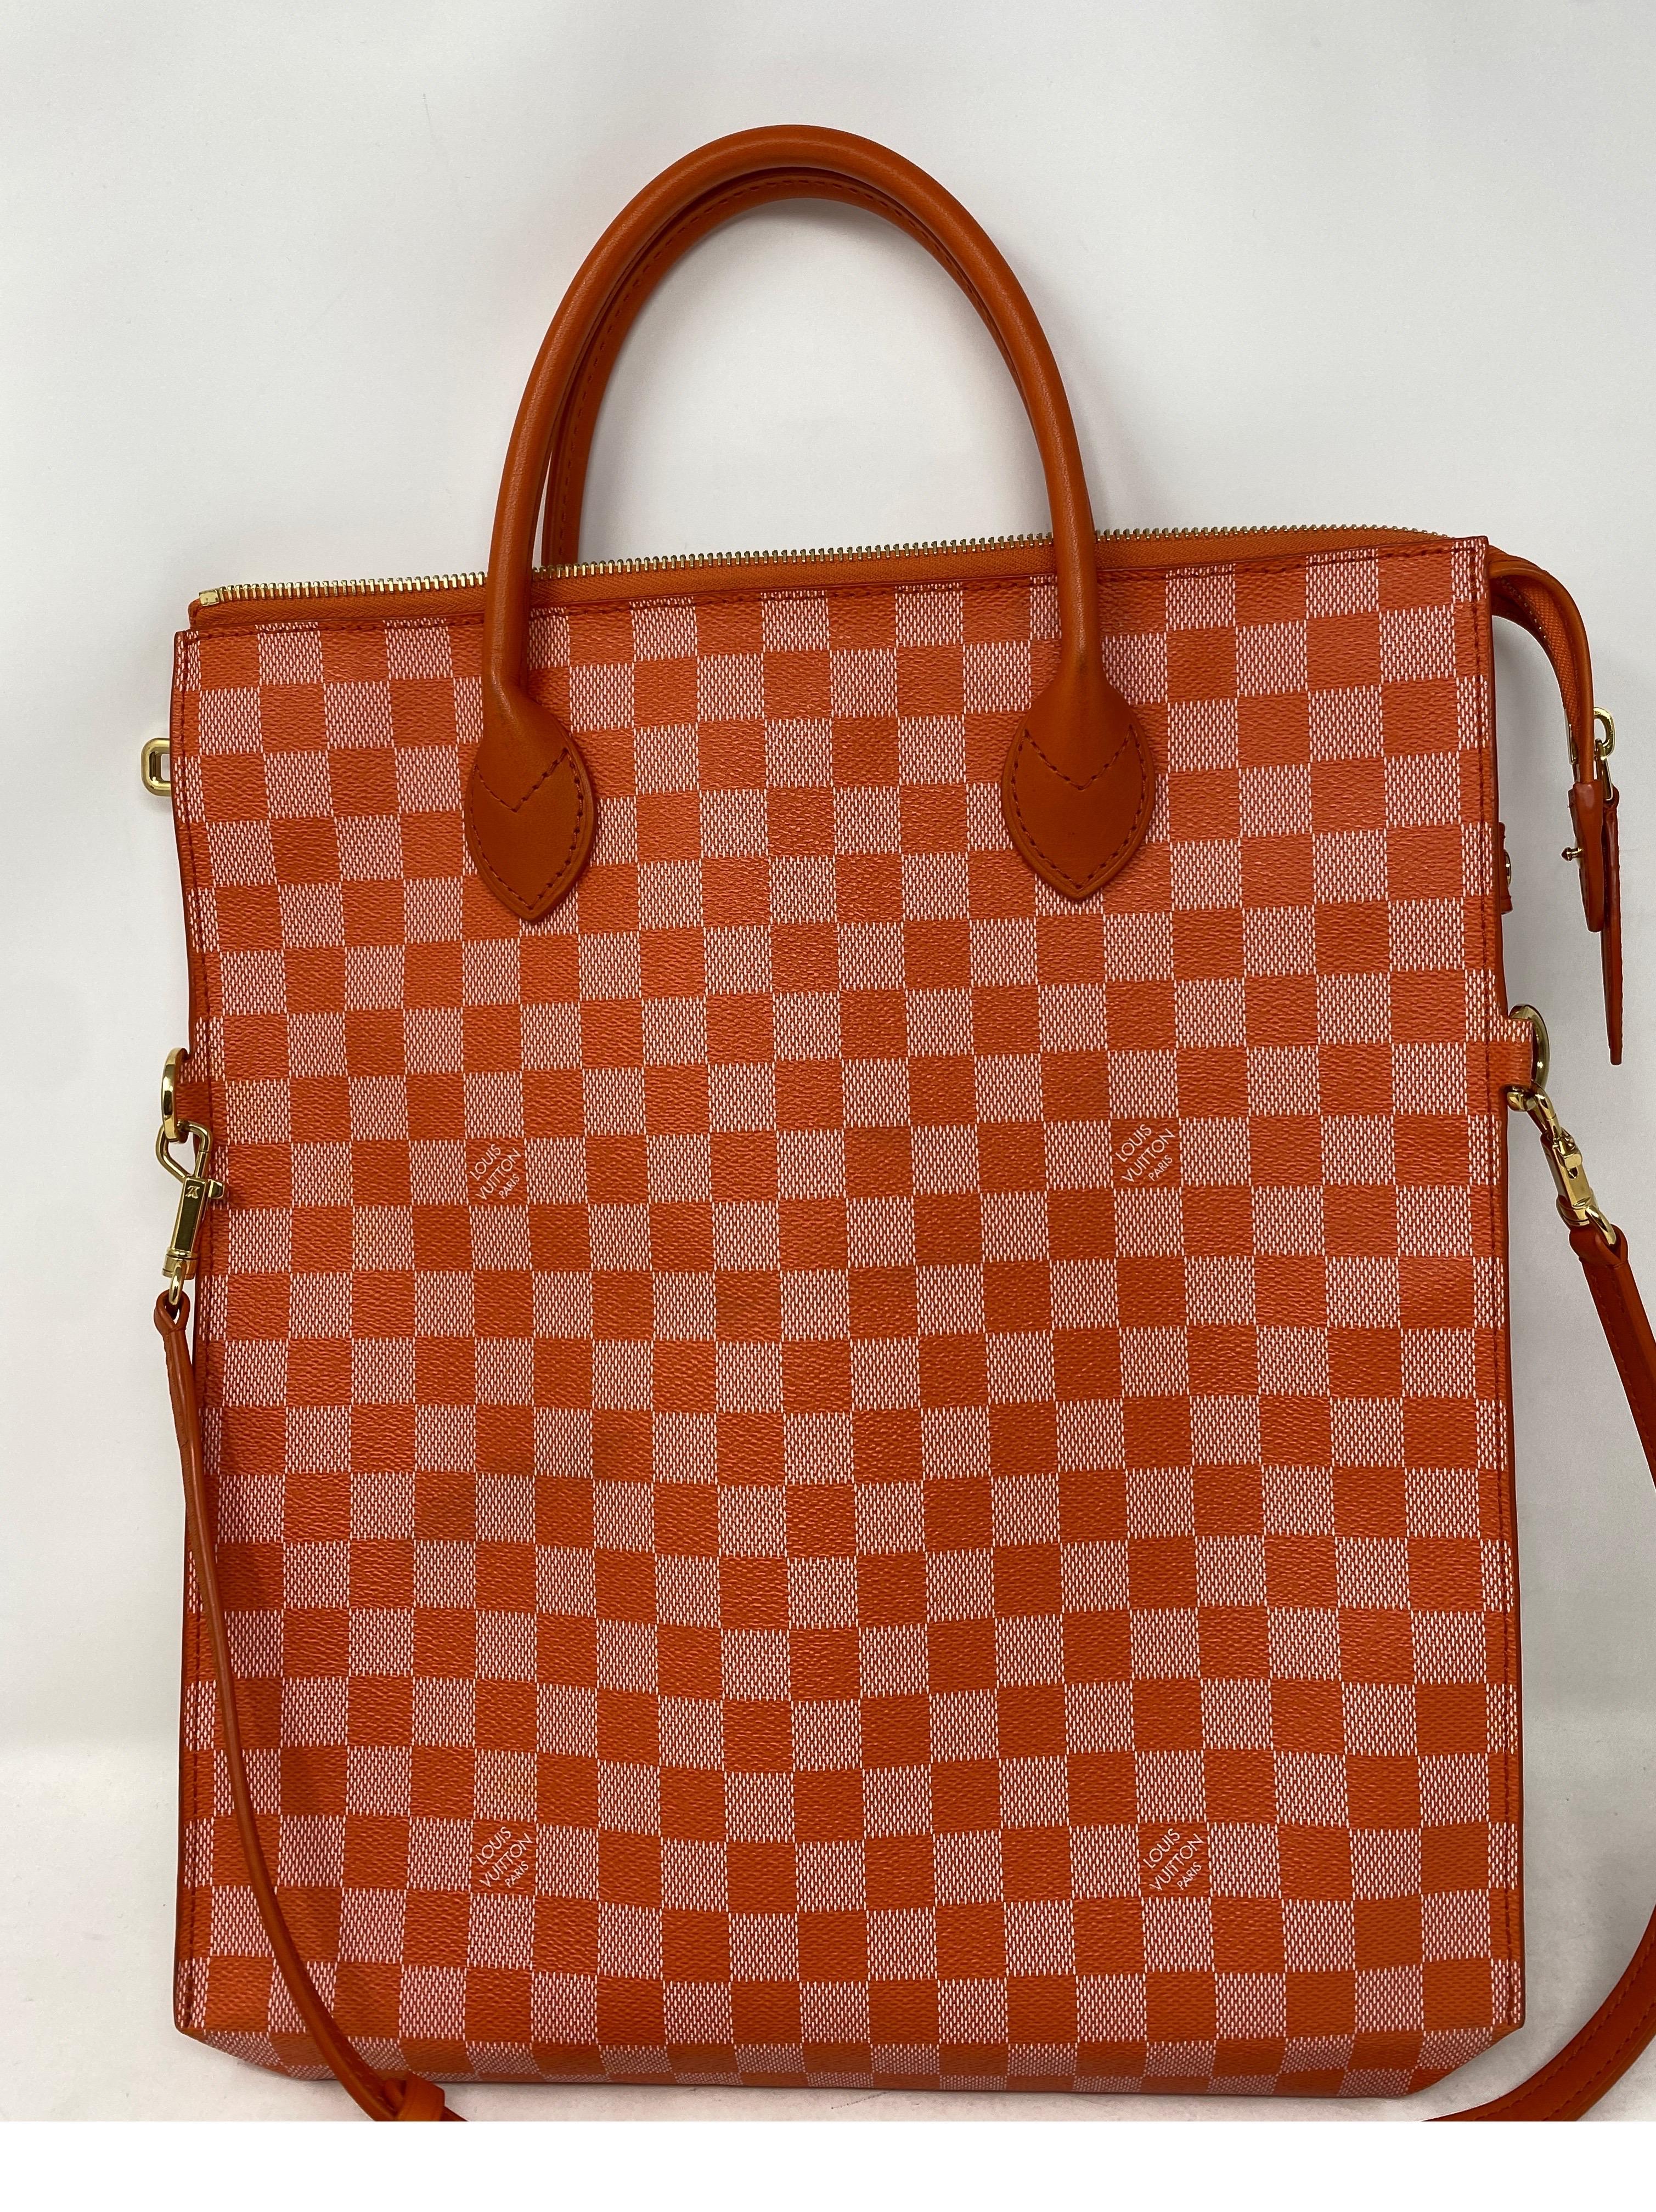 Louis Vuitton Orange Check Ebene Bag. Unique style bag from LV. Good condition. Light wear inside. Strap can be taken off. Wearable 2 ways. Guaranteed authentic. 